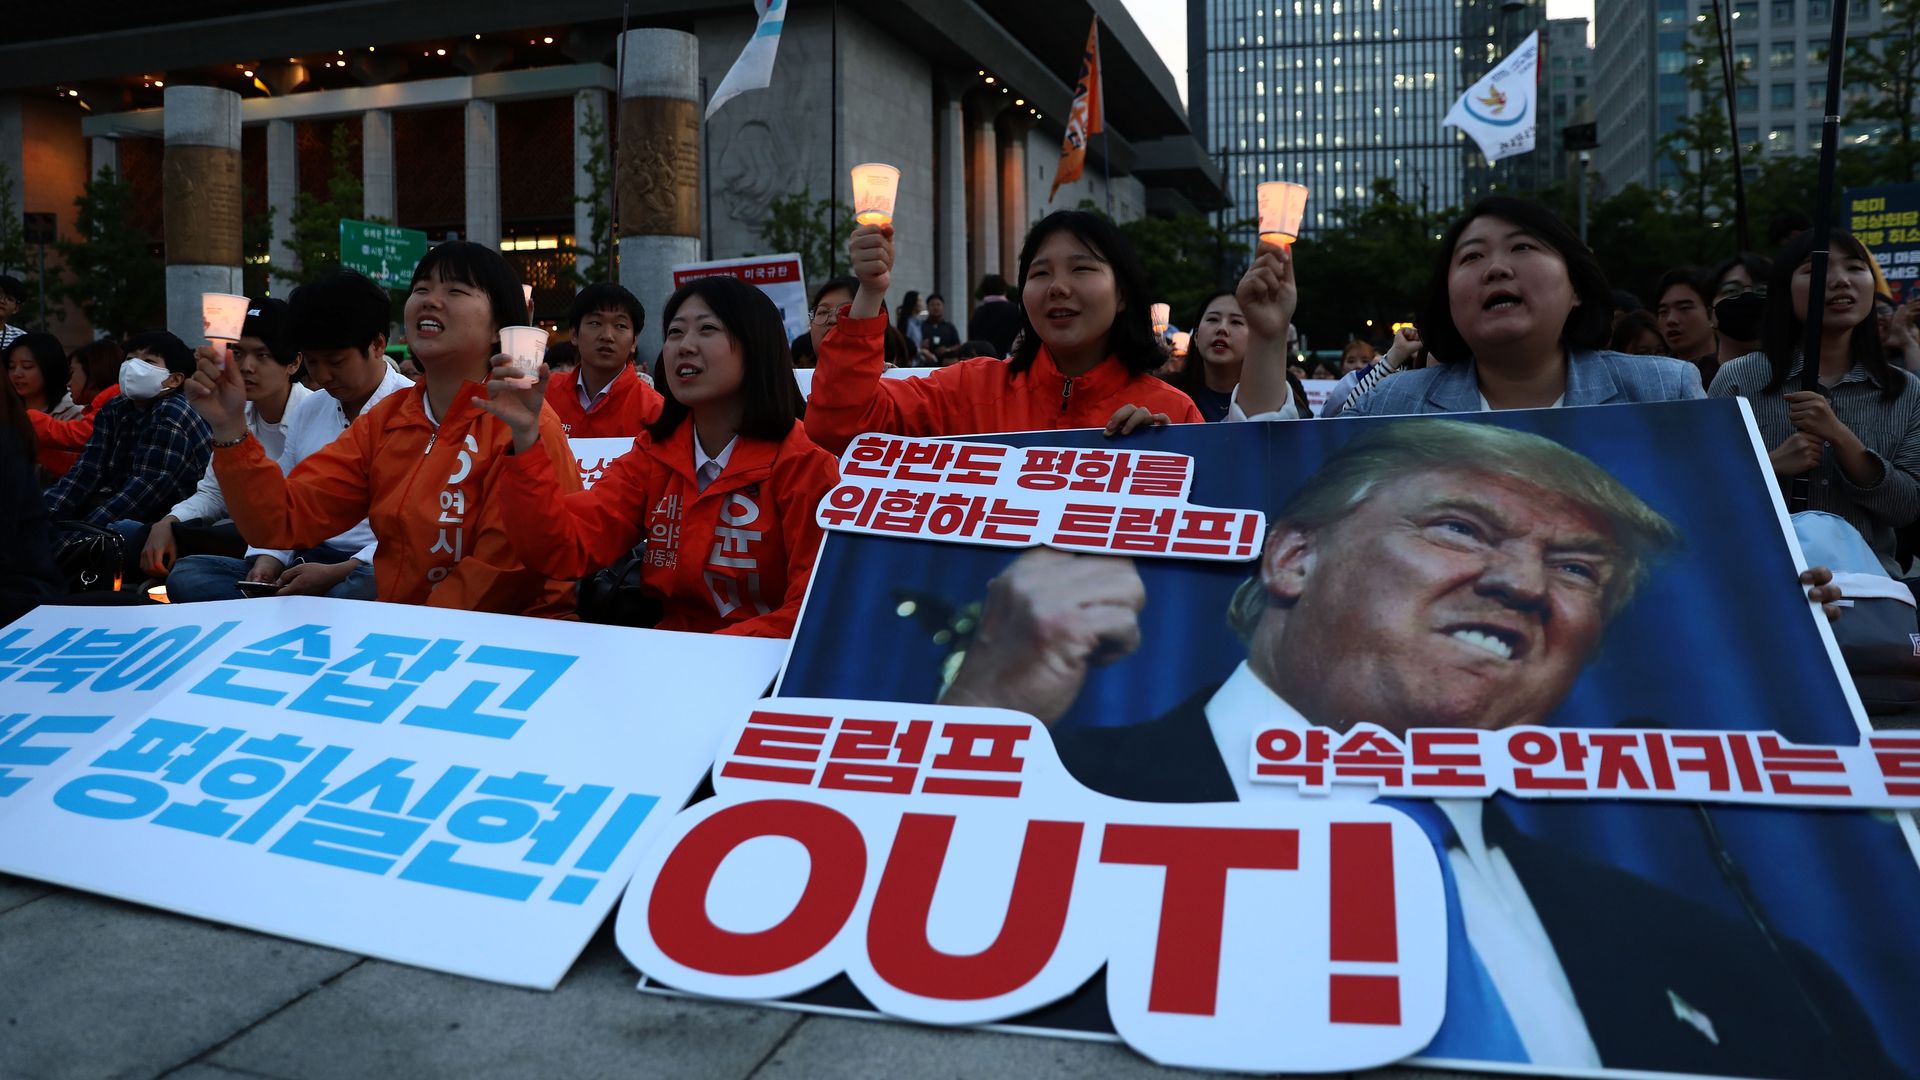 Activists gather in front of the U.S. embassy to demand peace for the Korean peninsula after the cancellation of the U.S. and North Korea summit on May 25, 2018 in Seoul, South Korea.  